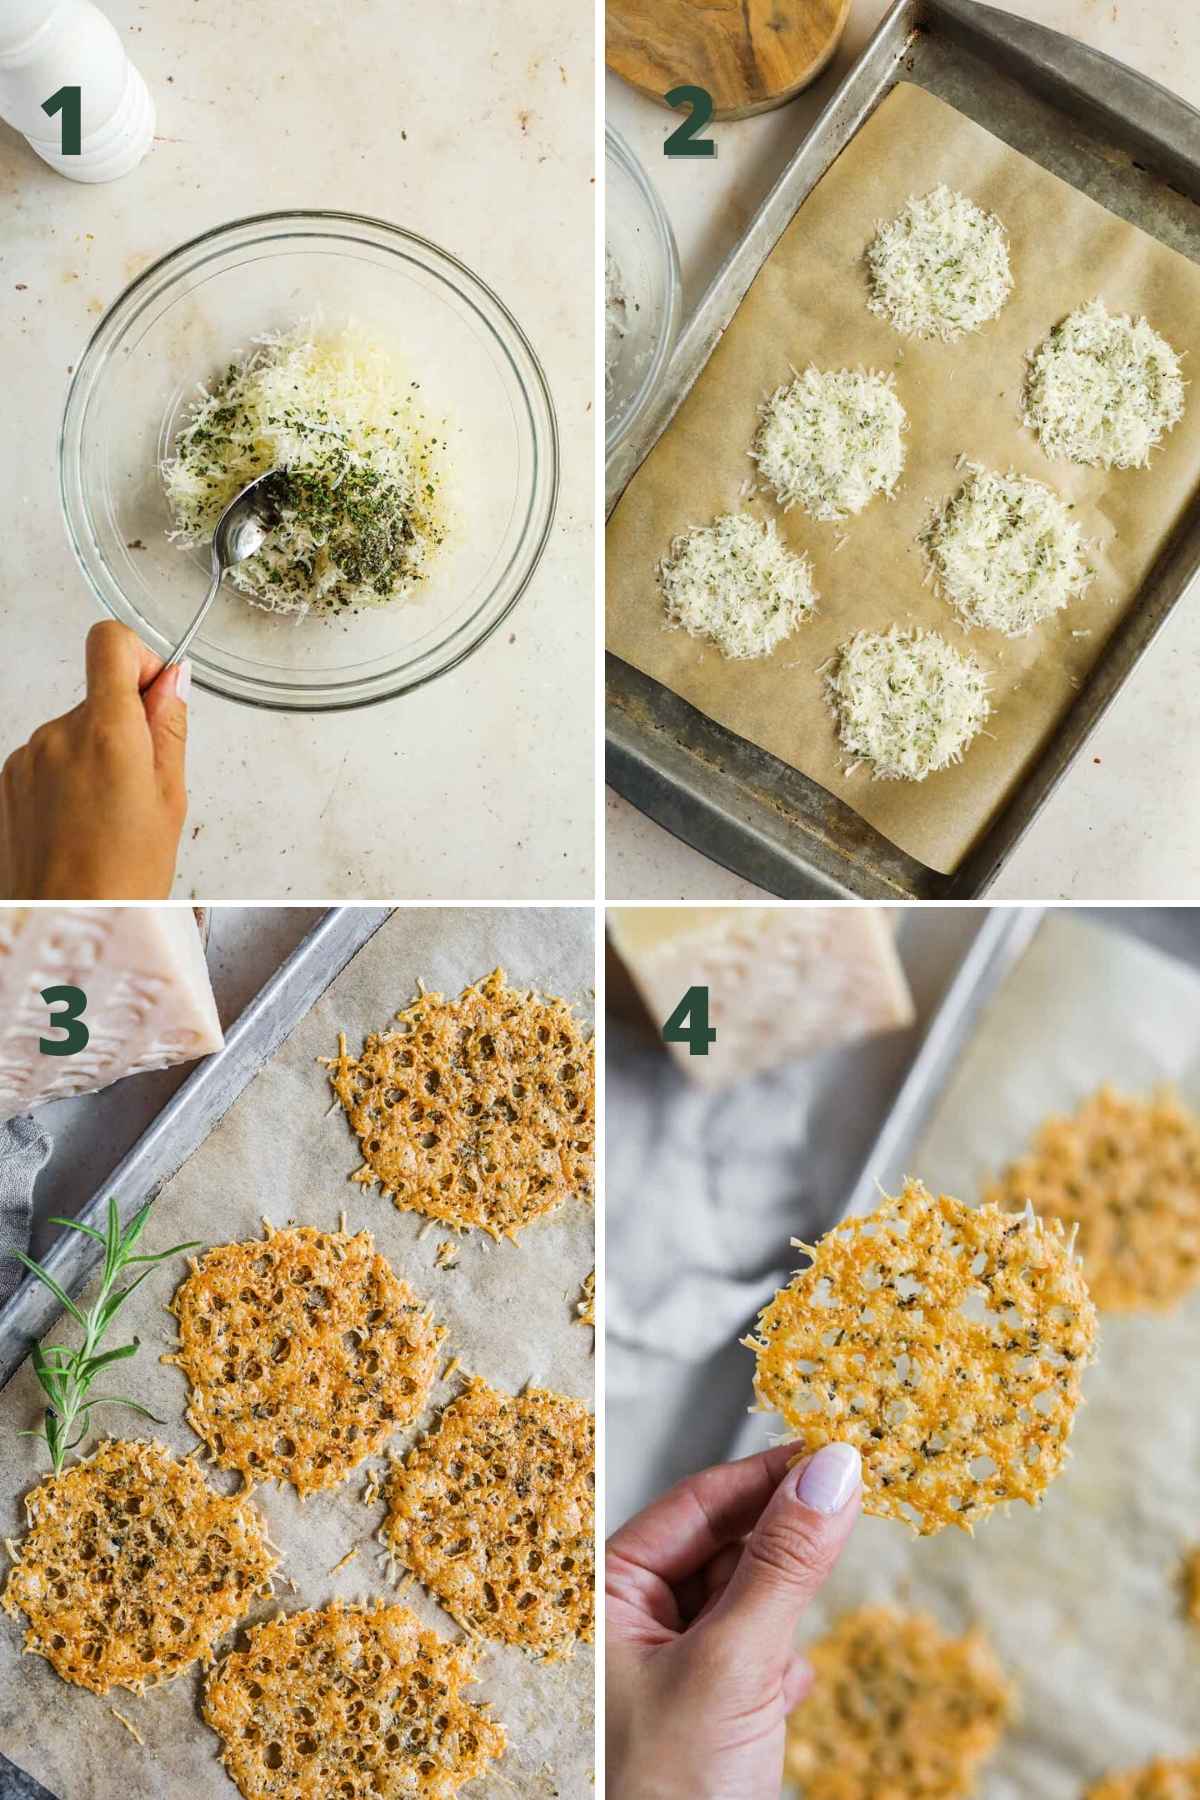 Steps to make creamy parmesan polenta with frico crisps, including mixing the cheese and herbs, placing the cheese on a baking sheet, and baking into crisps.